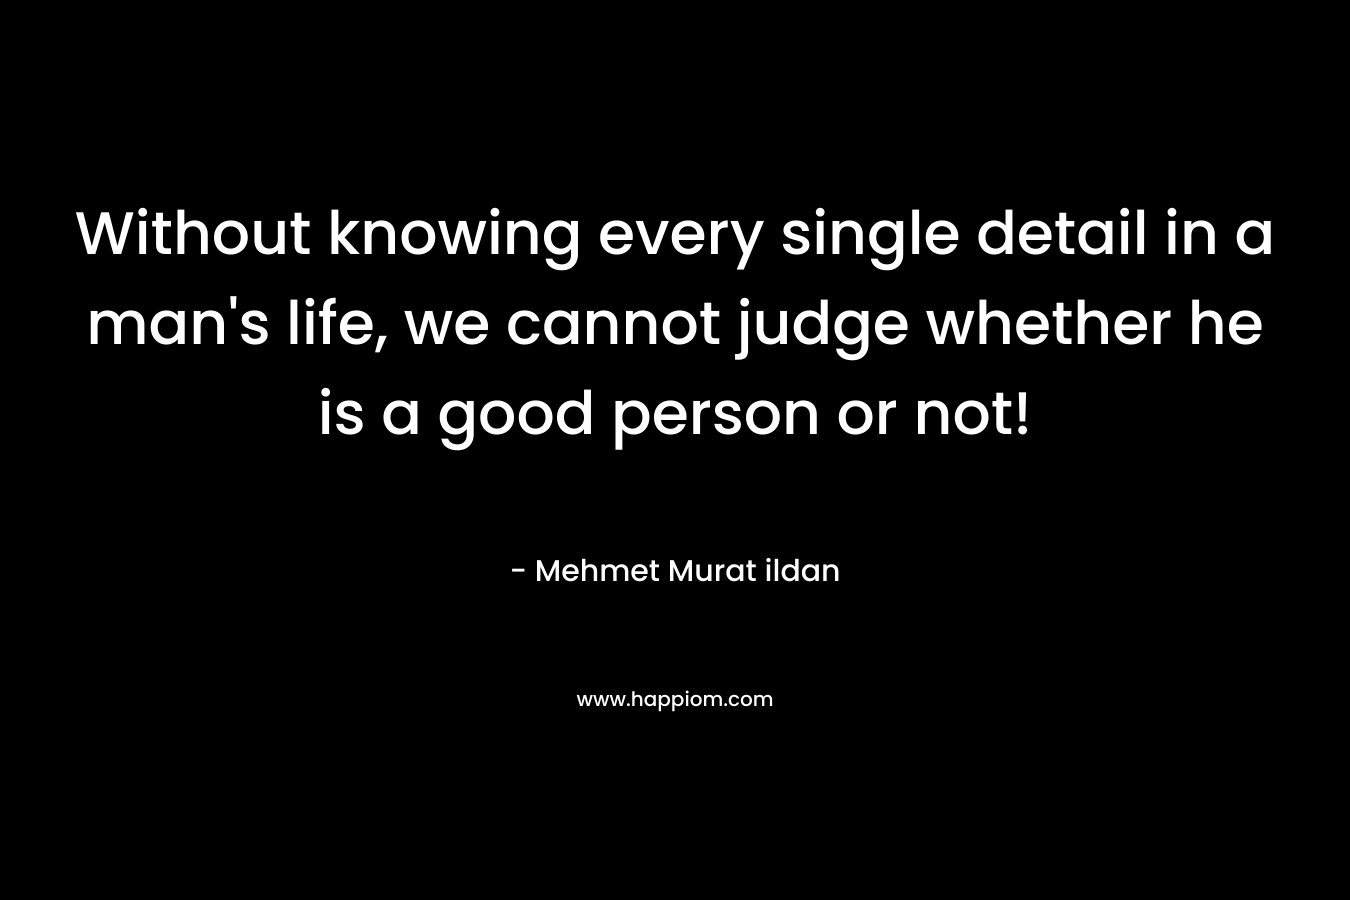 Without knowing every single detail in a man's life, we cannot judge whether he is a good person or not!